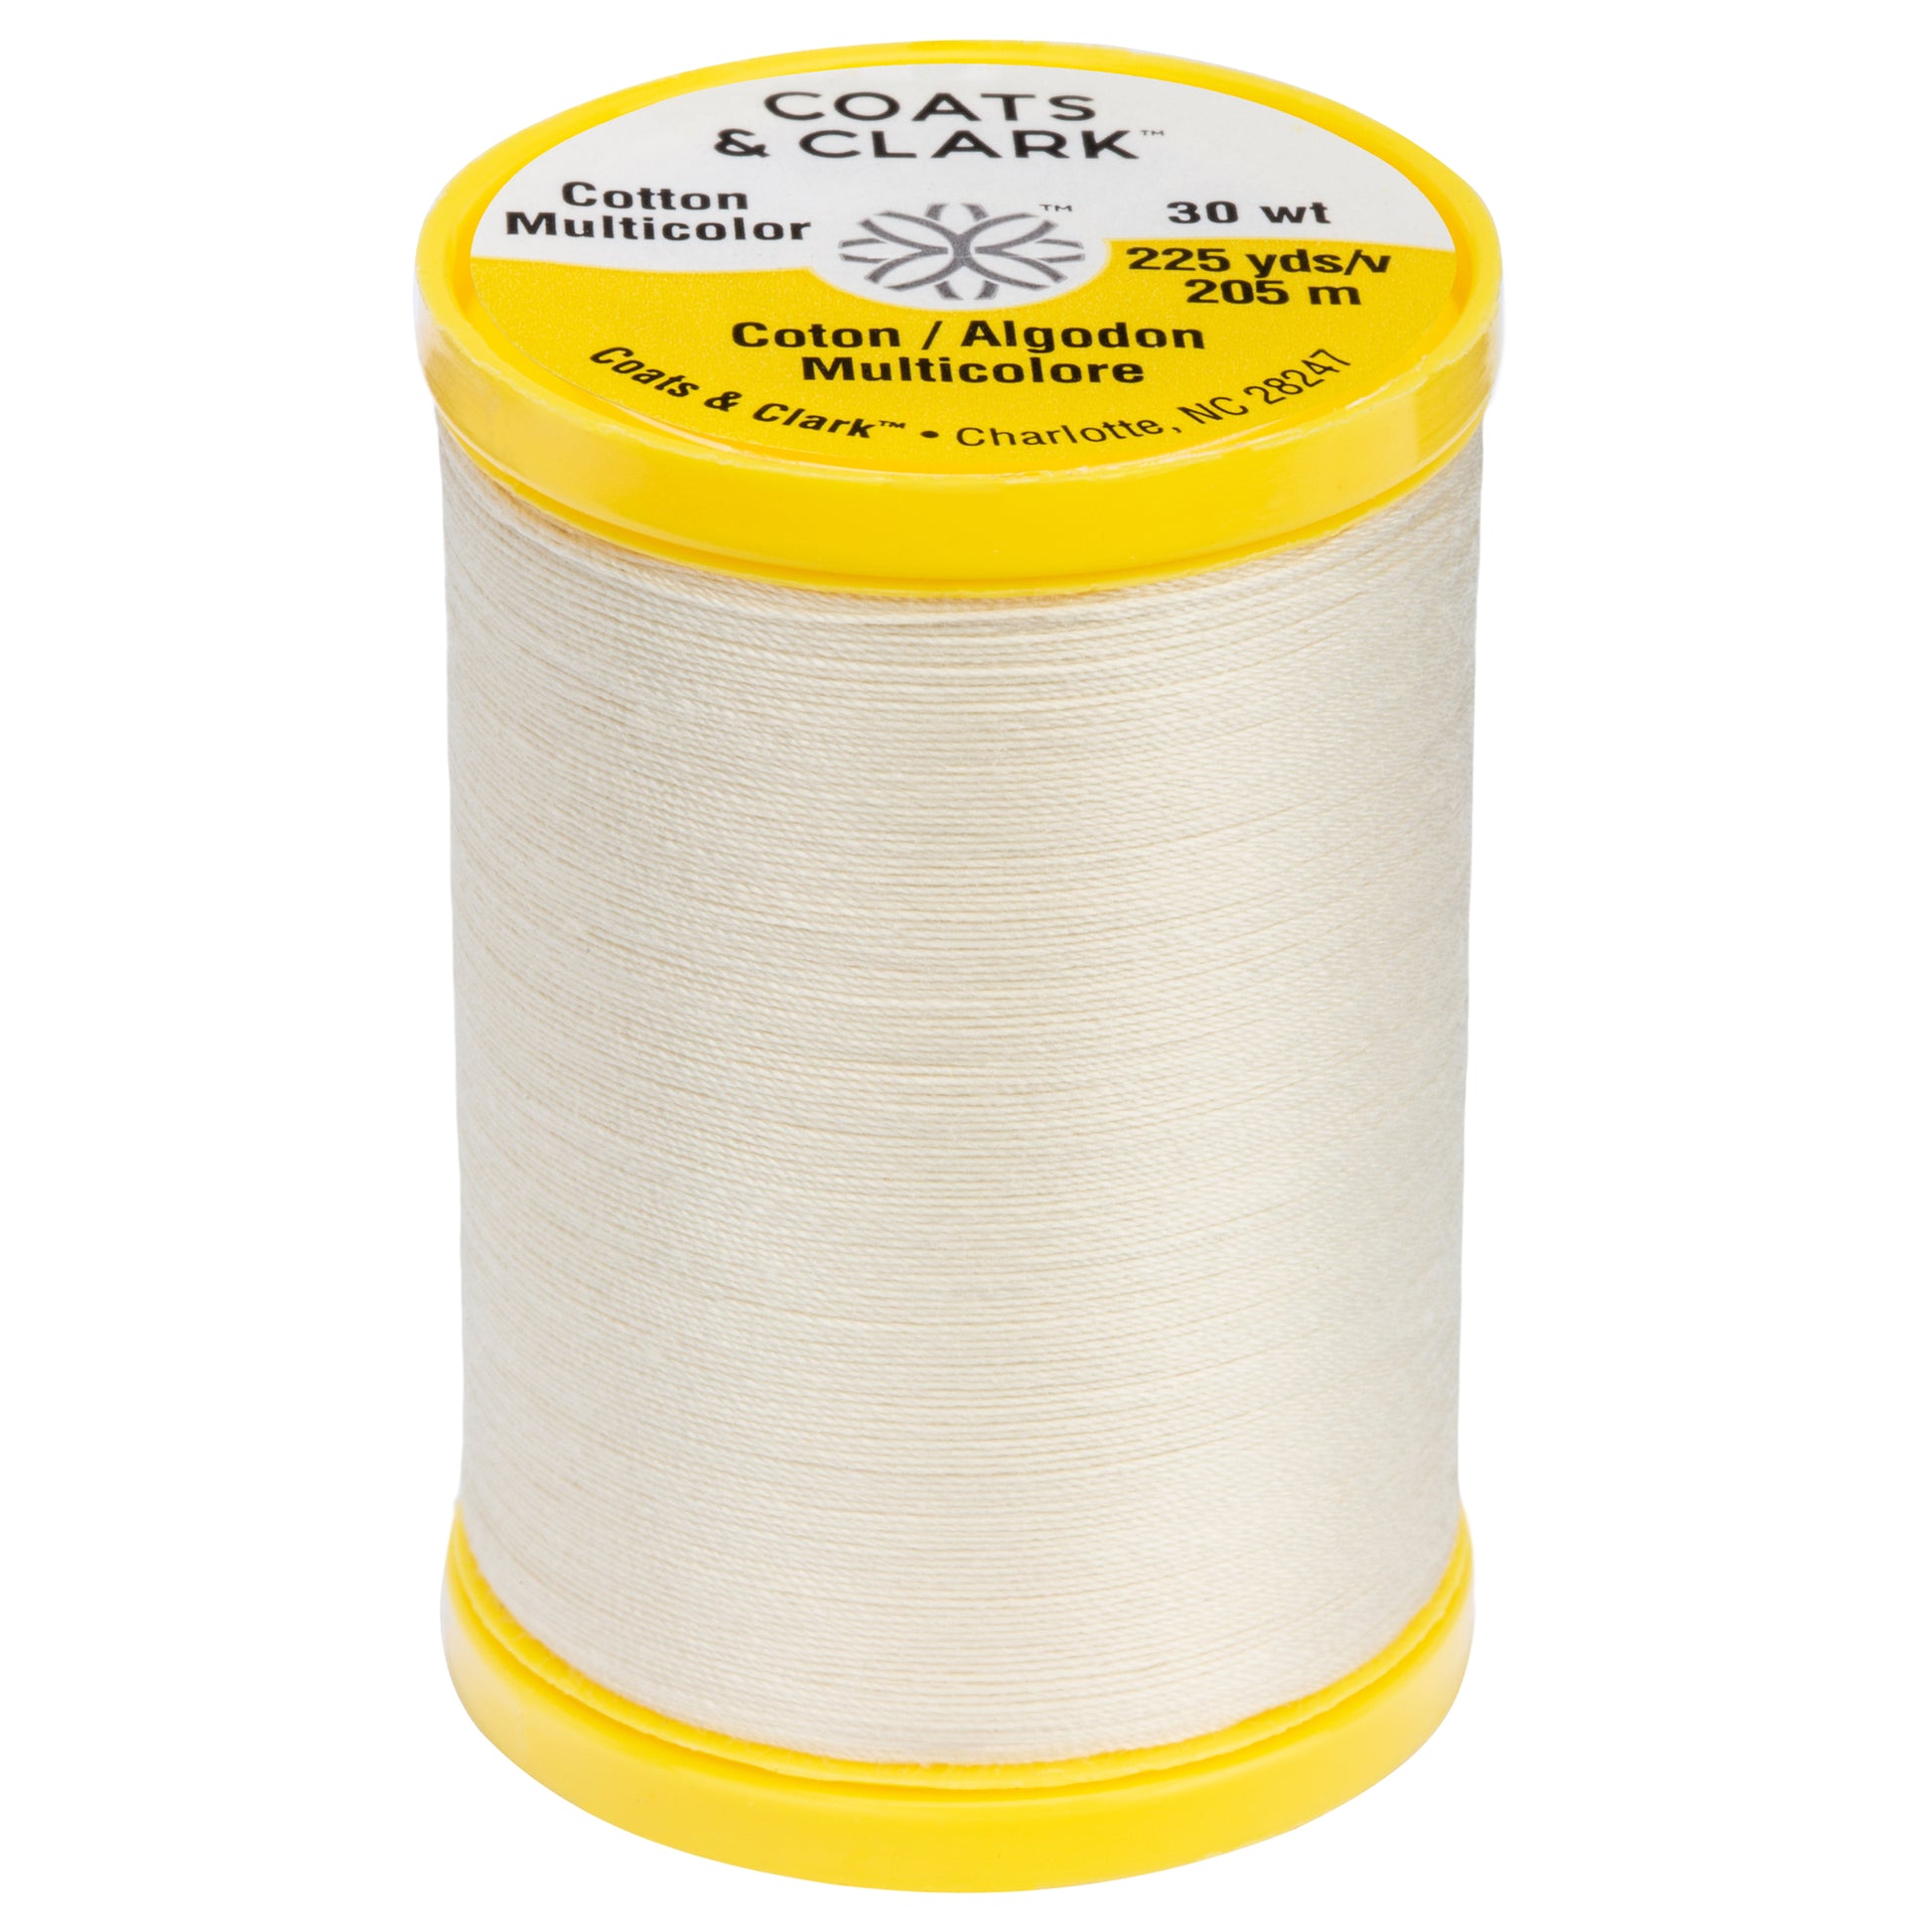 Coats & Clark Cotton All Purpose Sewing Thread (225 Yards)